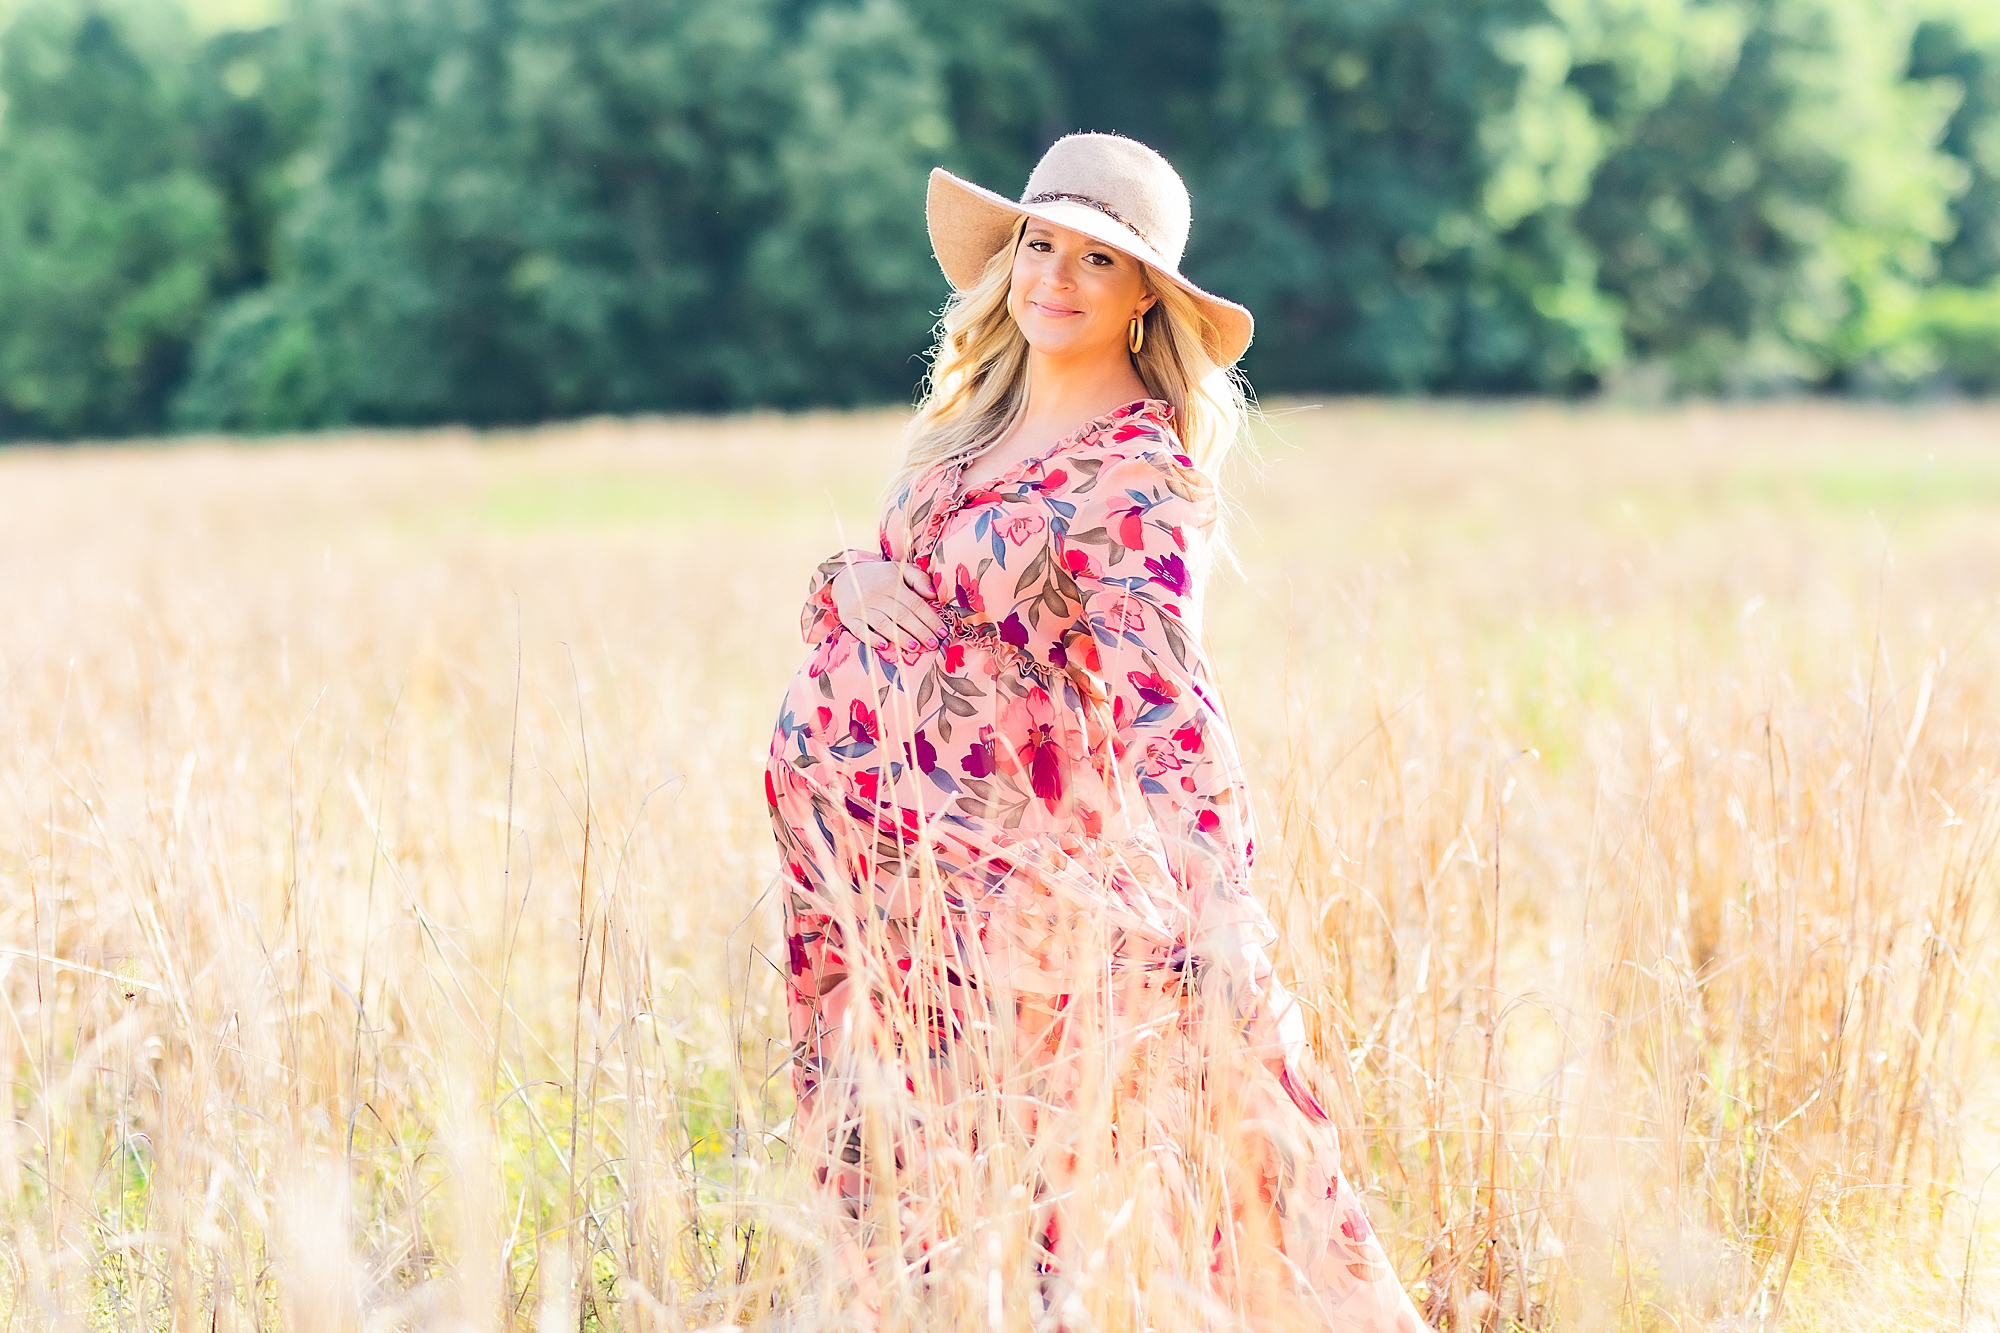 mom stands in field during maternity photos holding baby bump